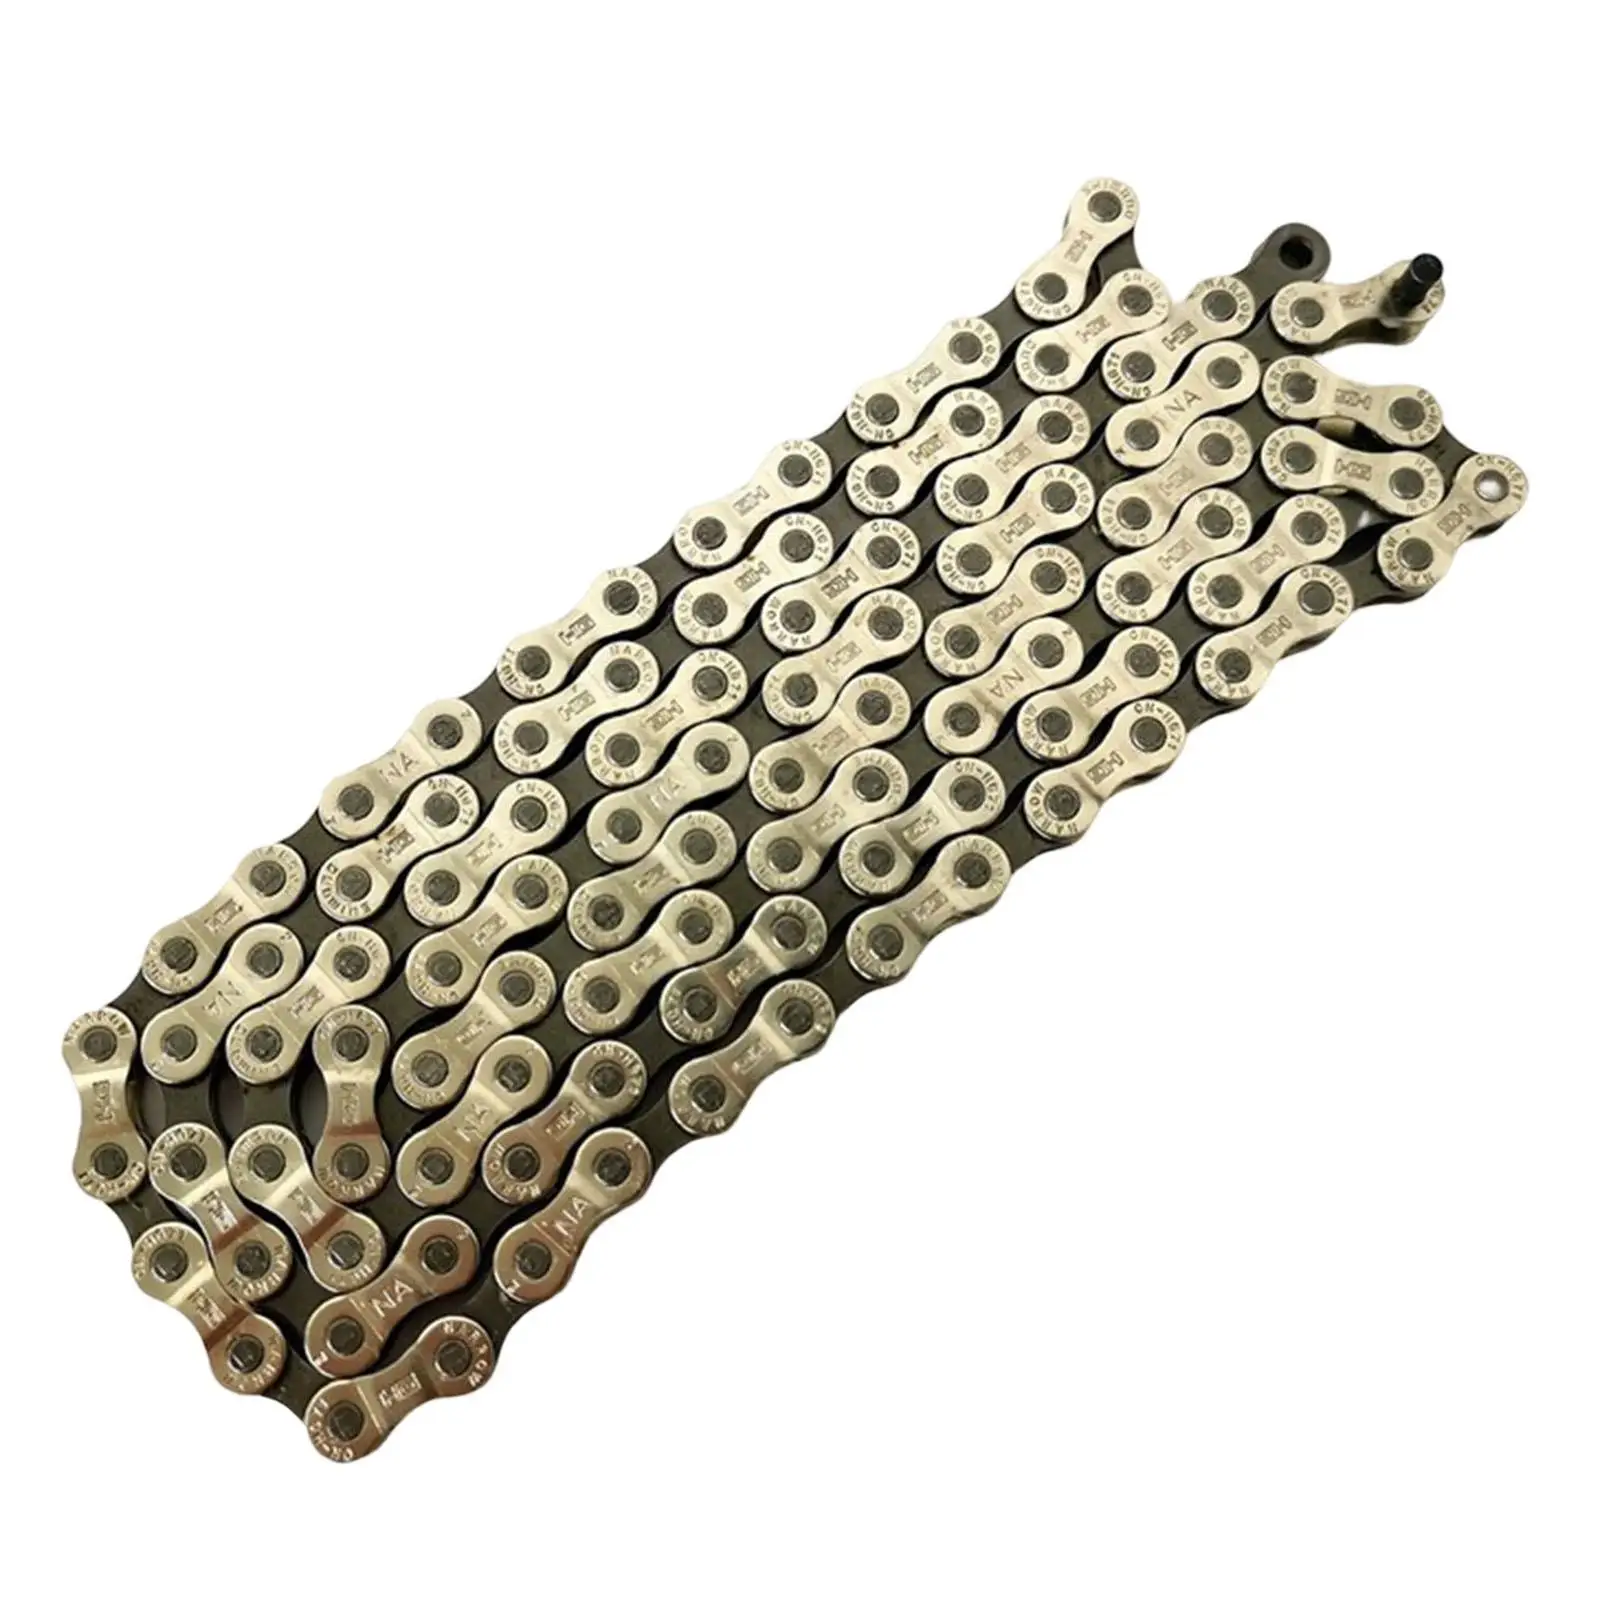 MTB Bicycle Chain Universal 112 Links 6/7/8 Speeds Chains Replacement Repair